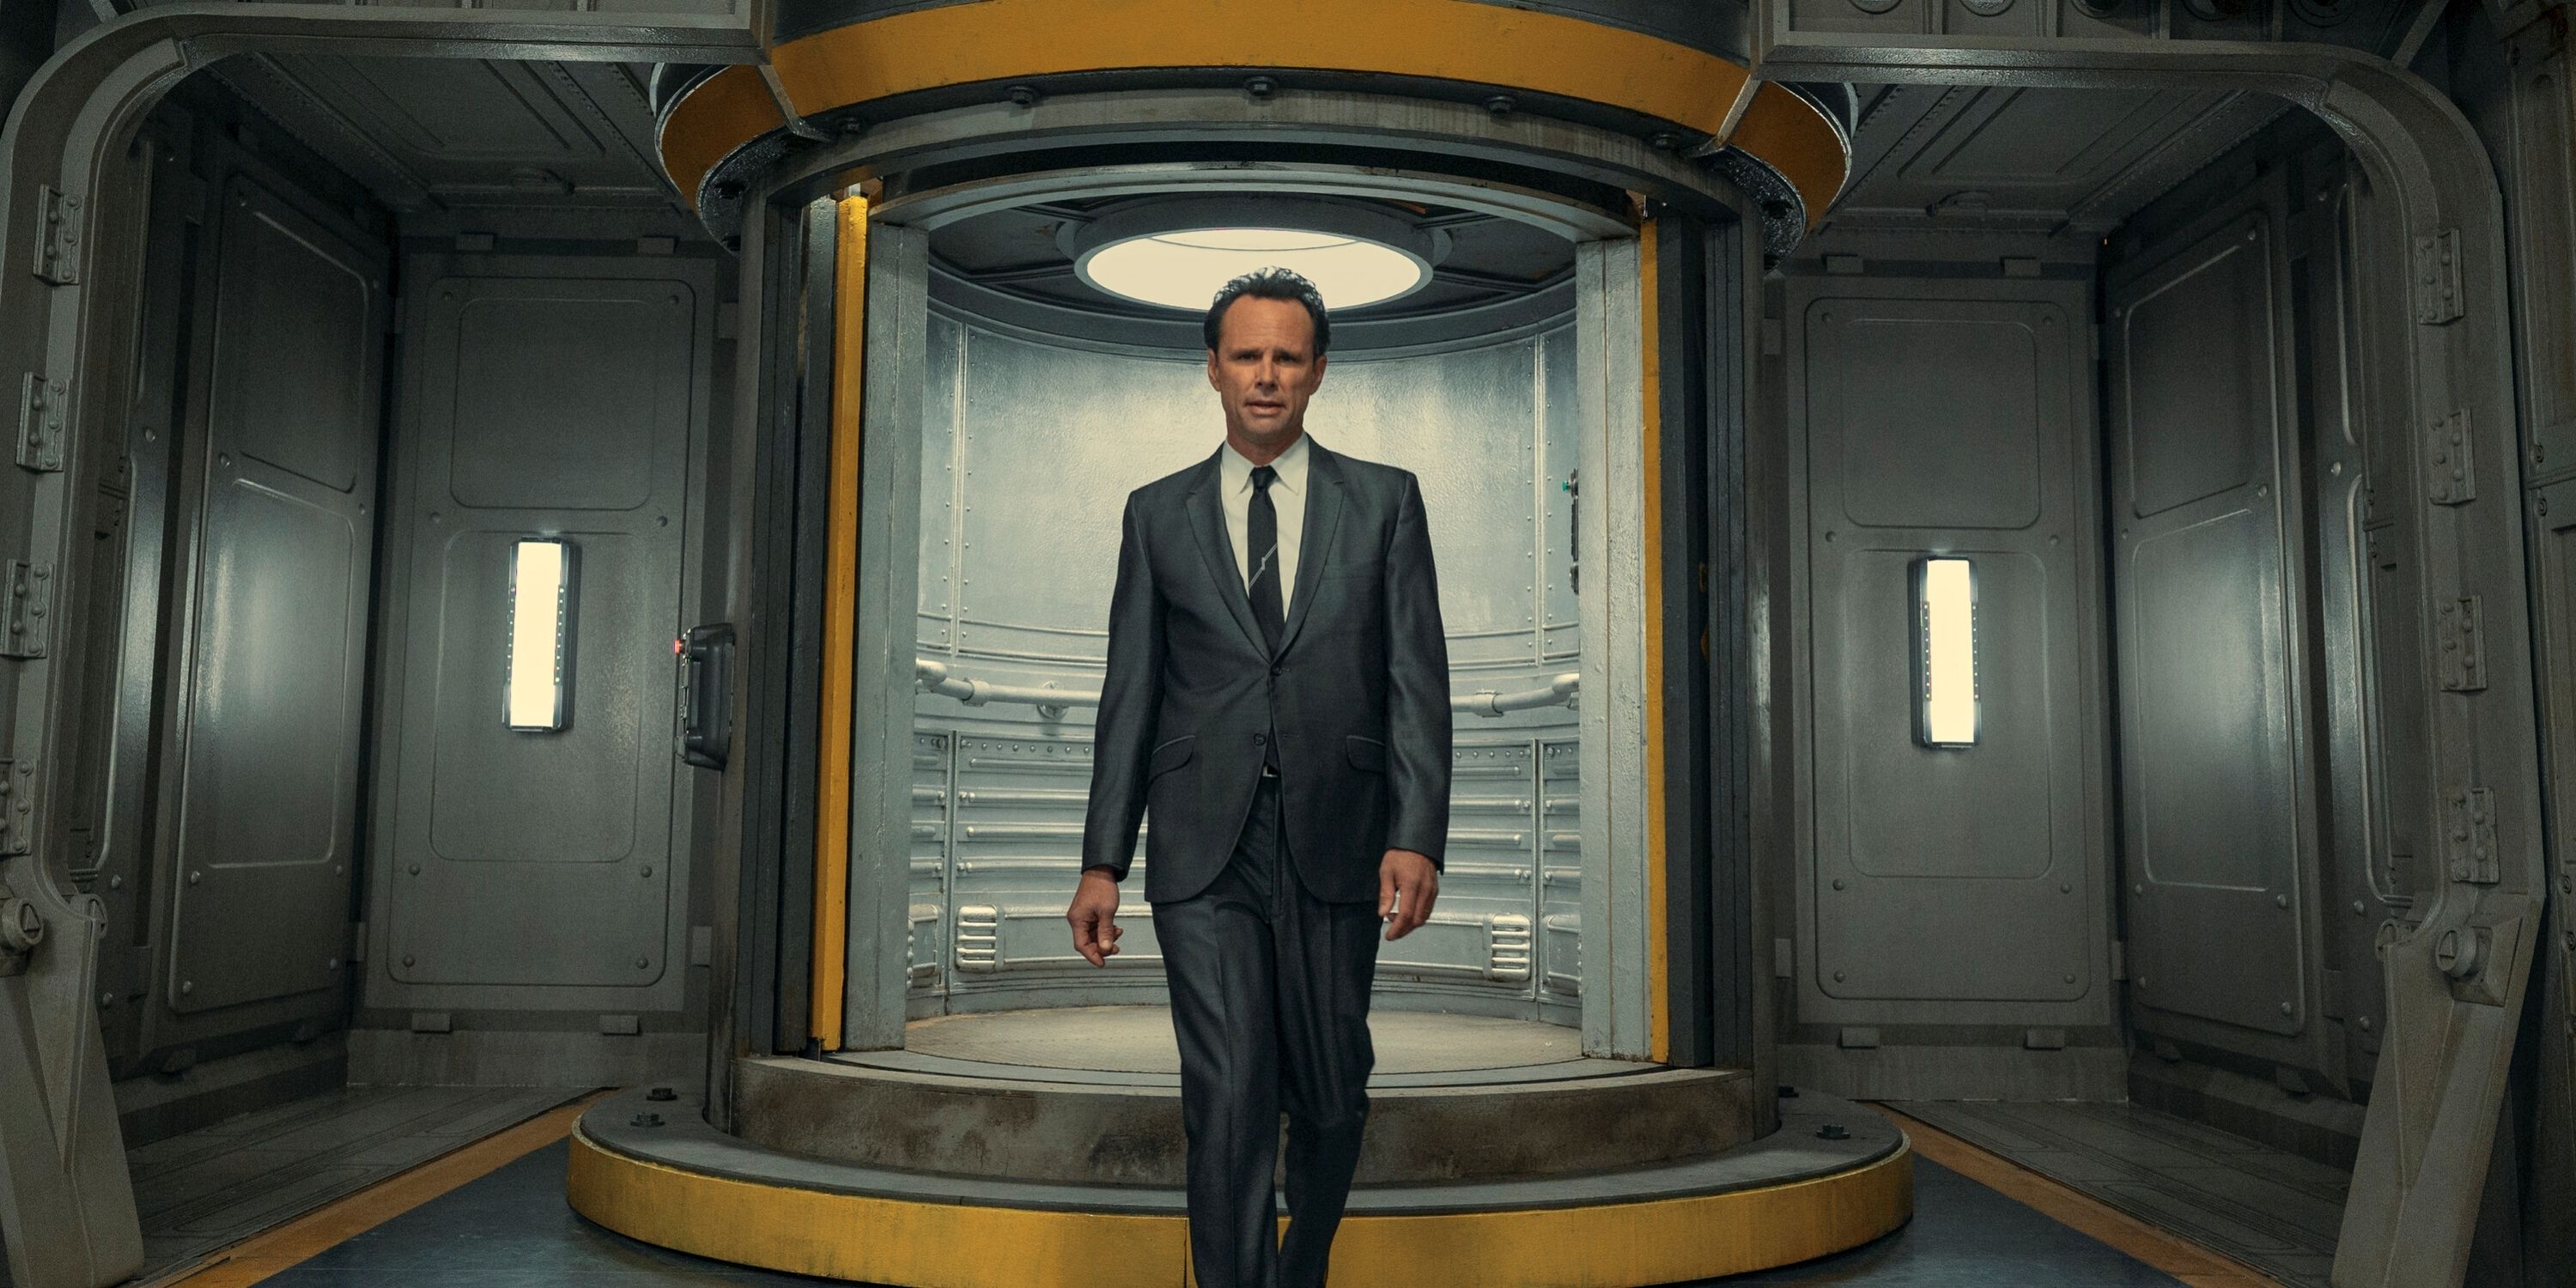 Walton Goggins as Cooper Howard walking down a valut hallway in Prime Video's Fallout